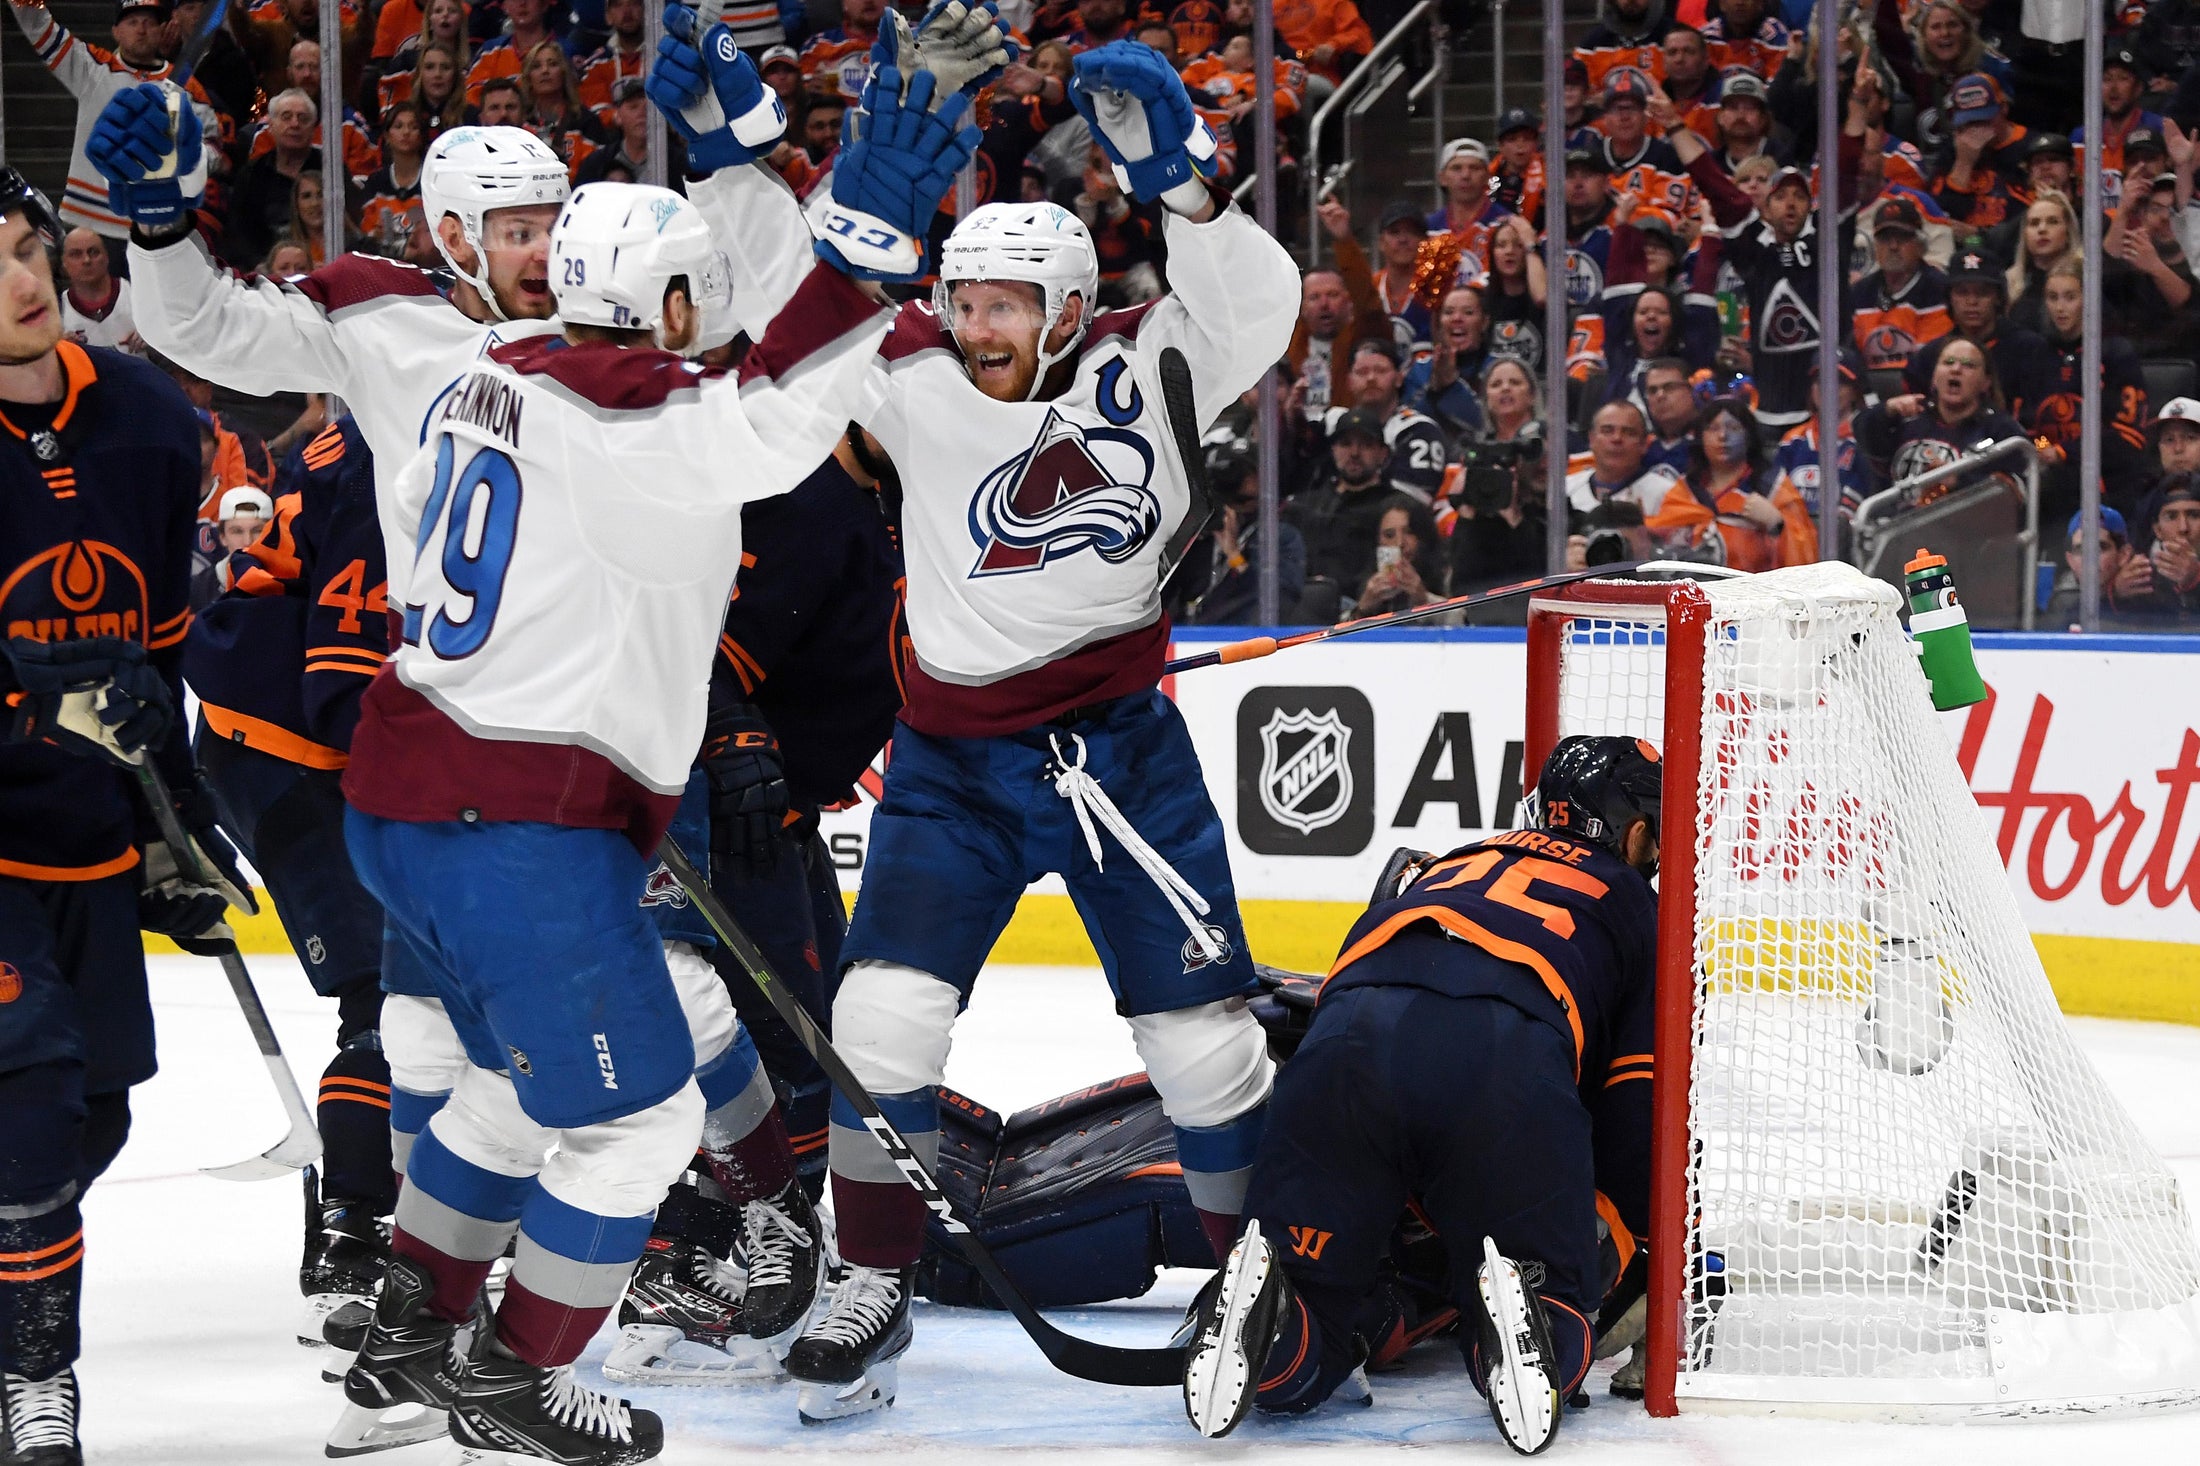 The Colorado Avalanche’s NHL Stanley Cup playoffs run to the finals is